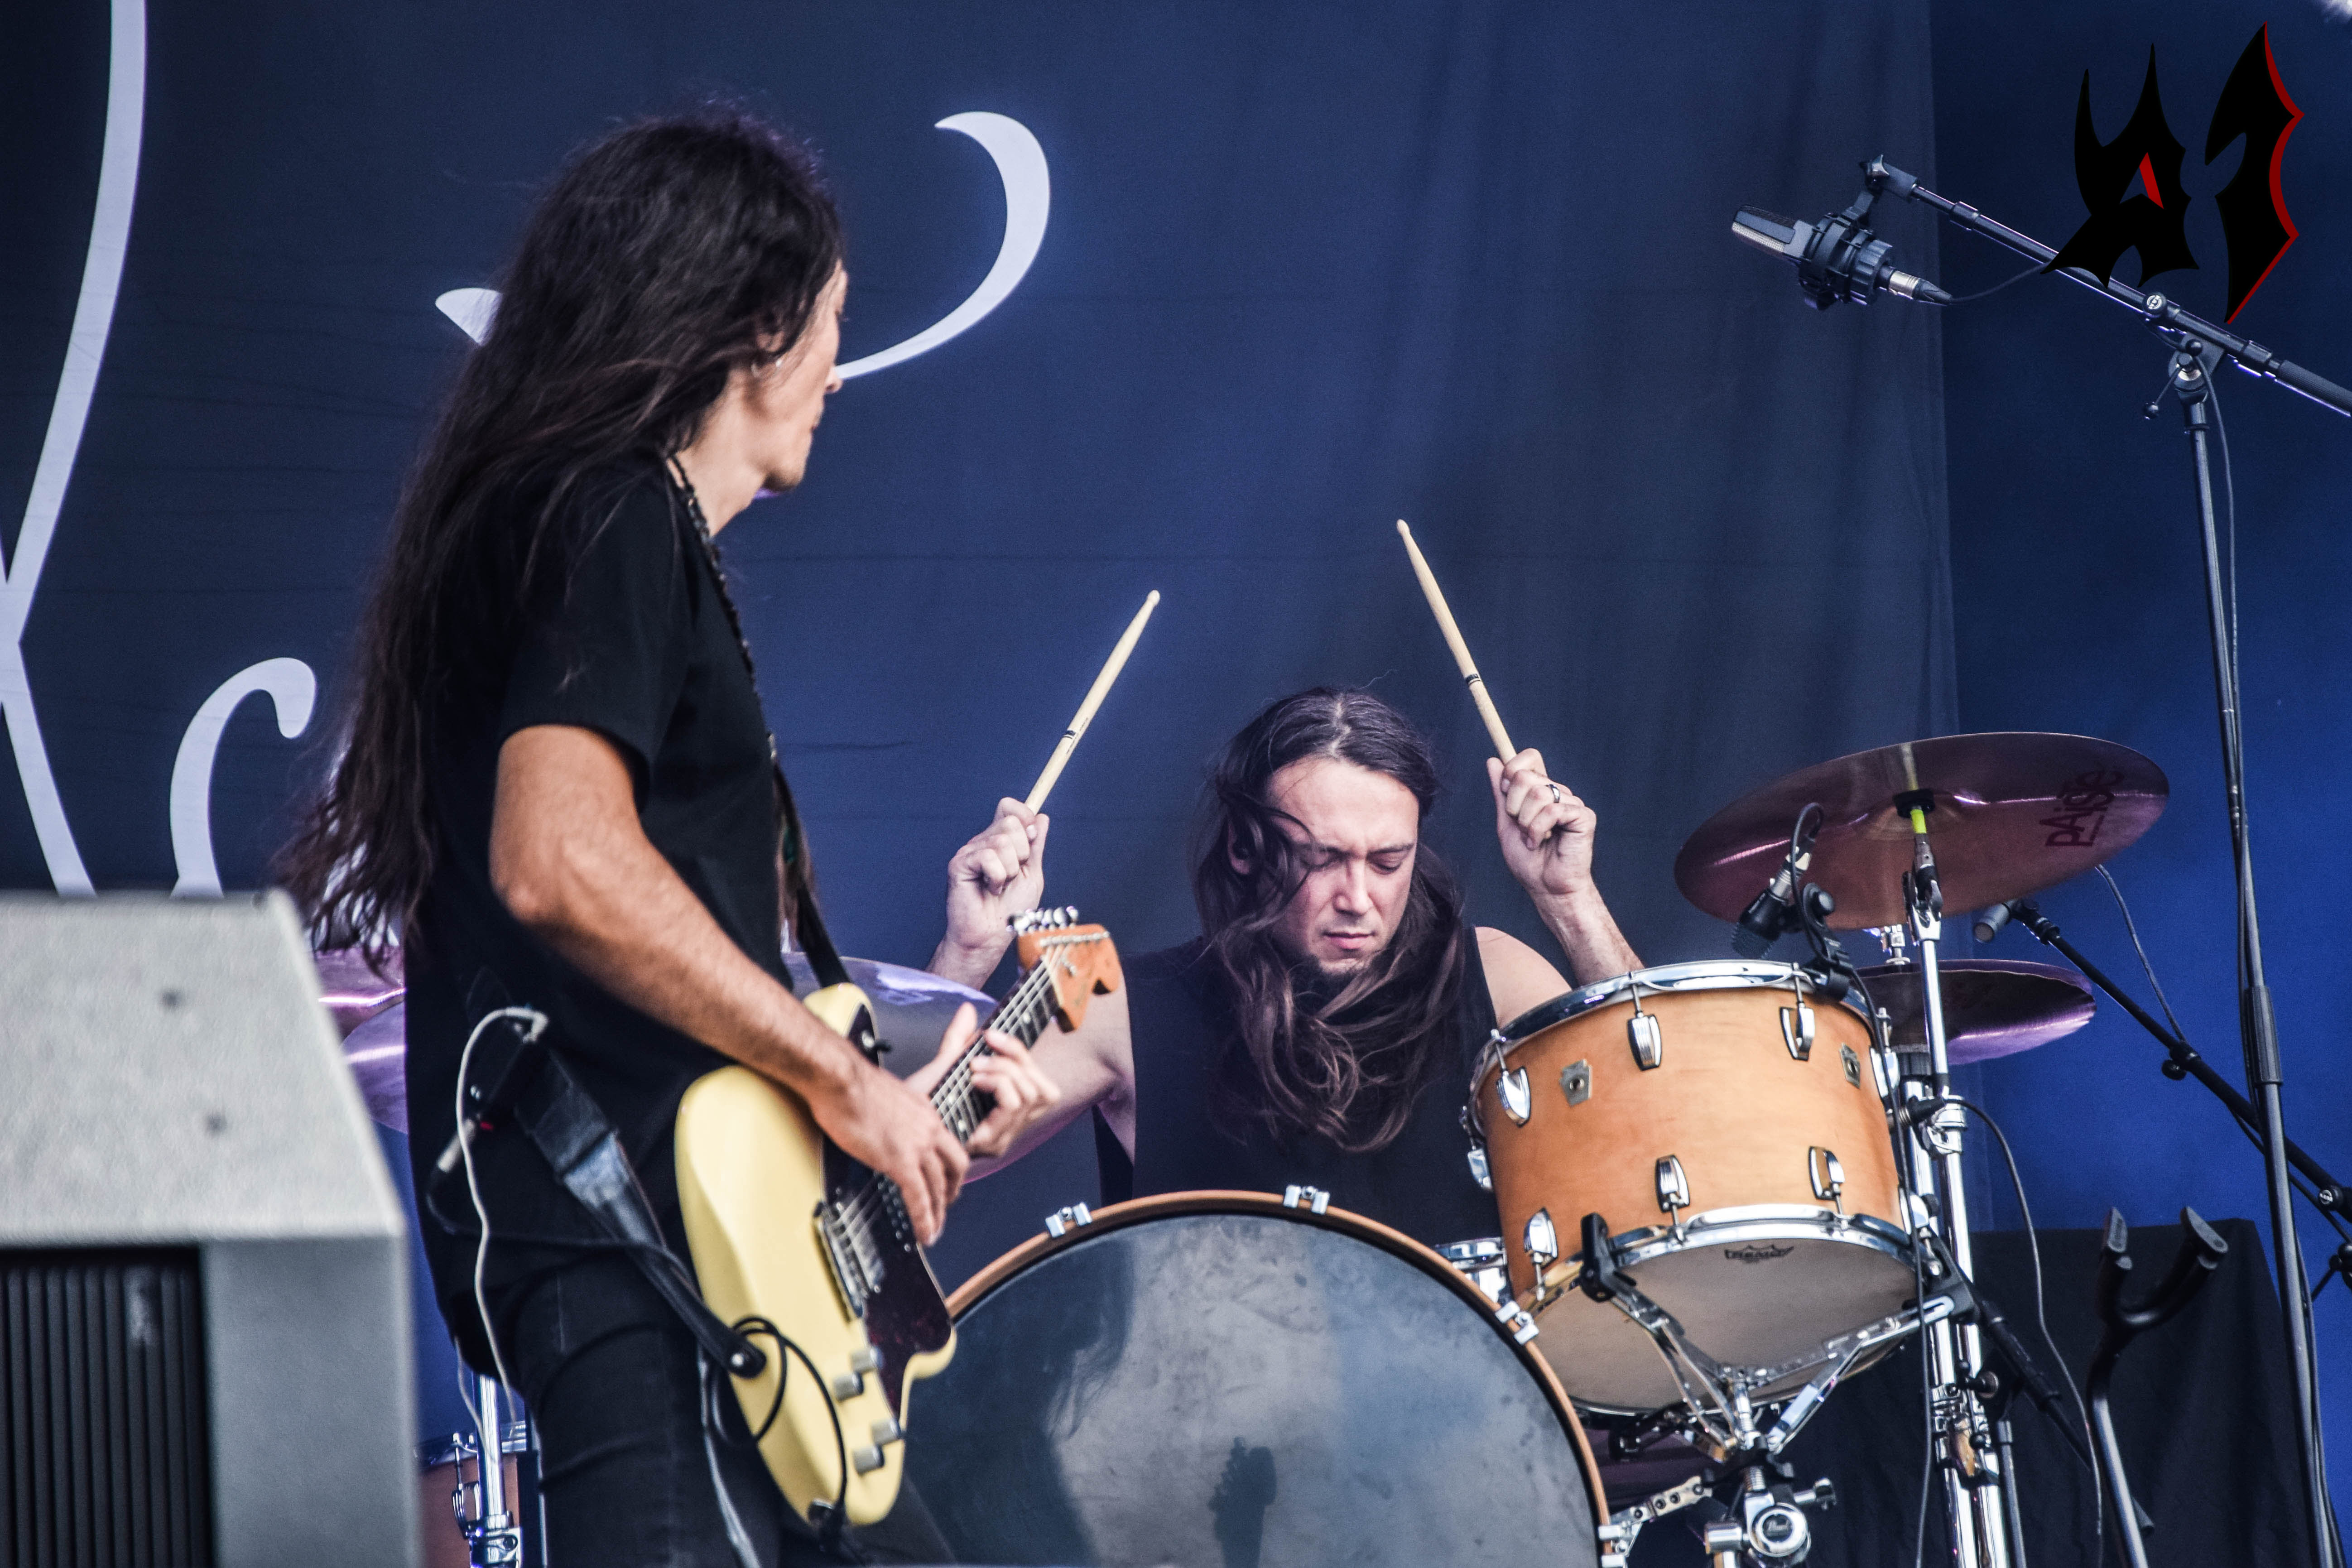 Donwload 2018 – Day 2 - Alcest 16